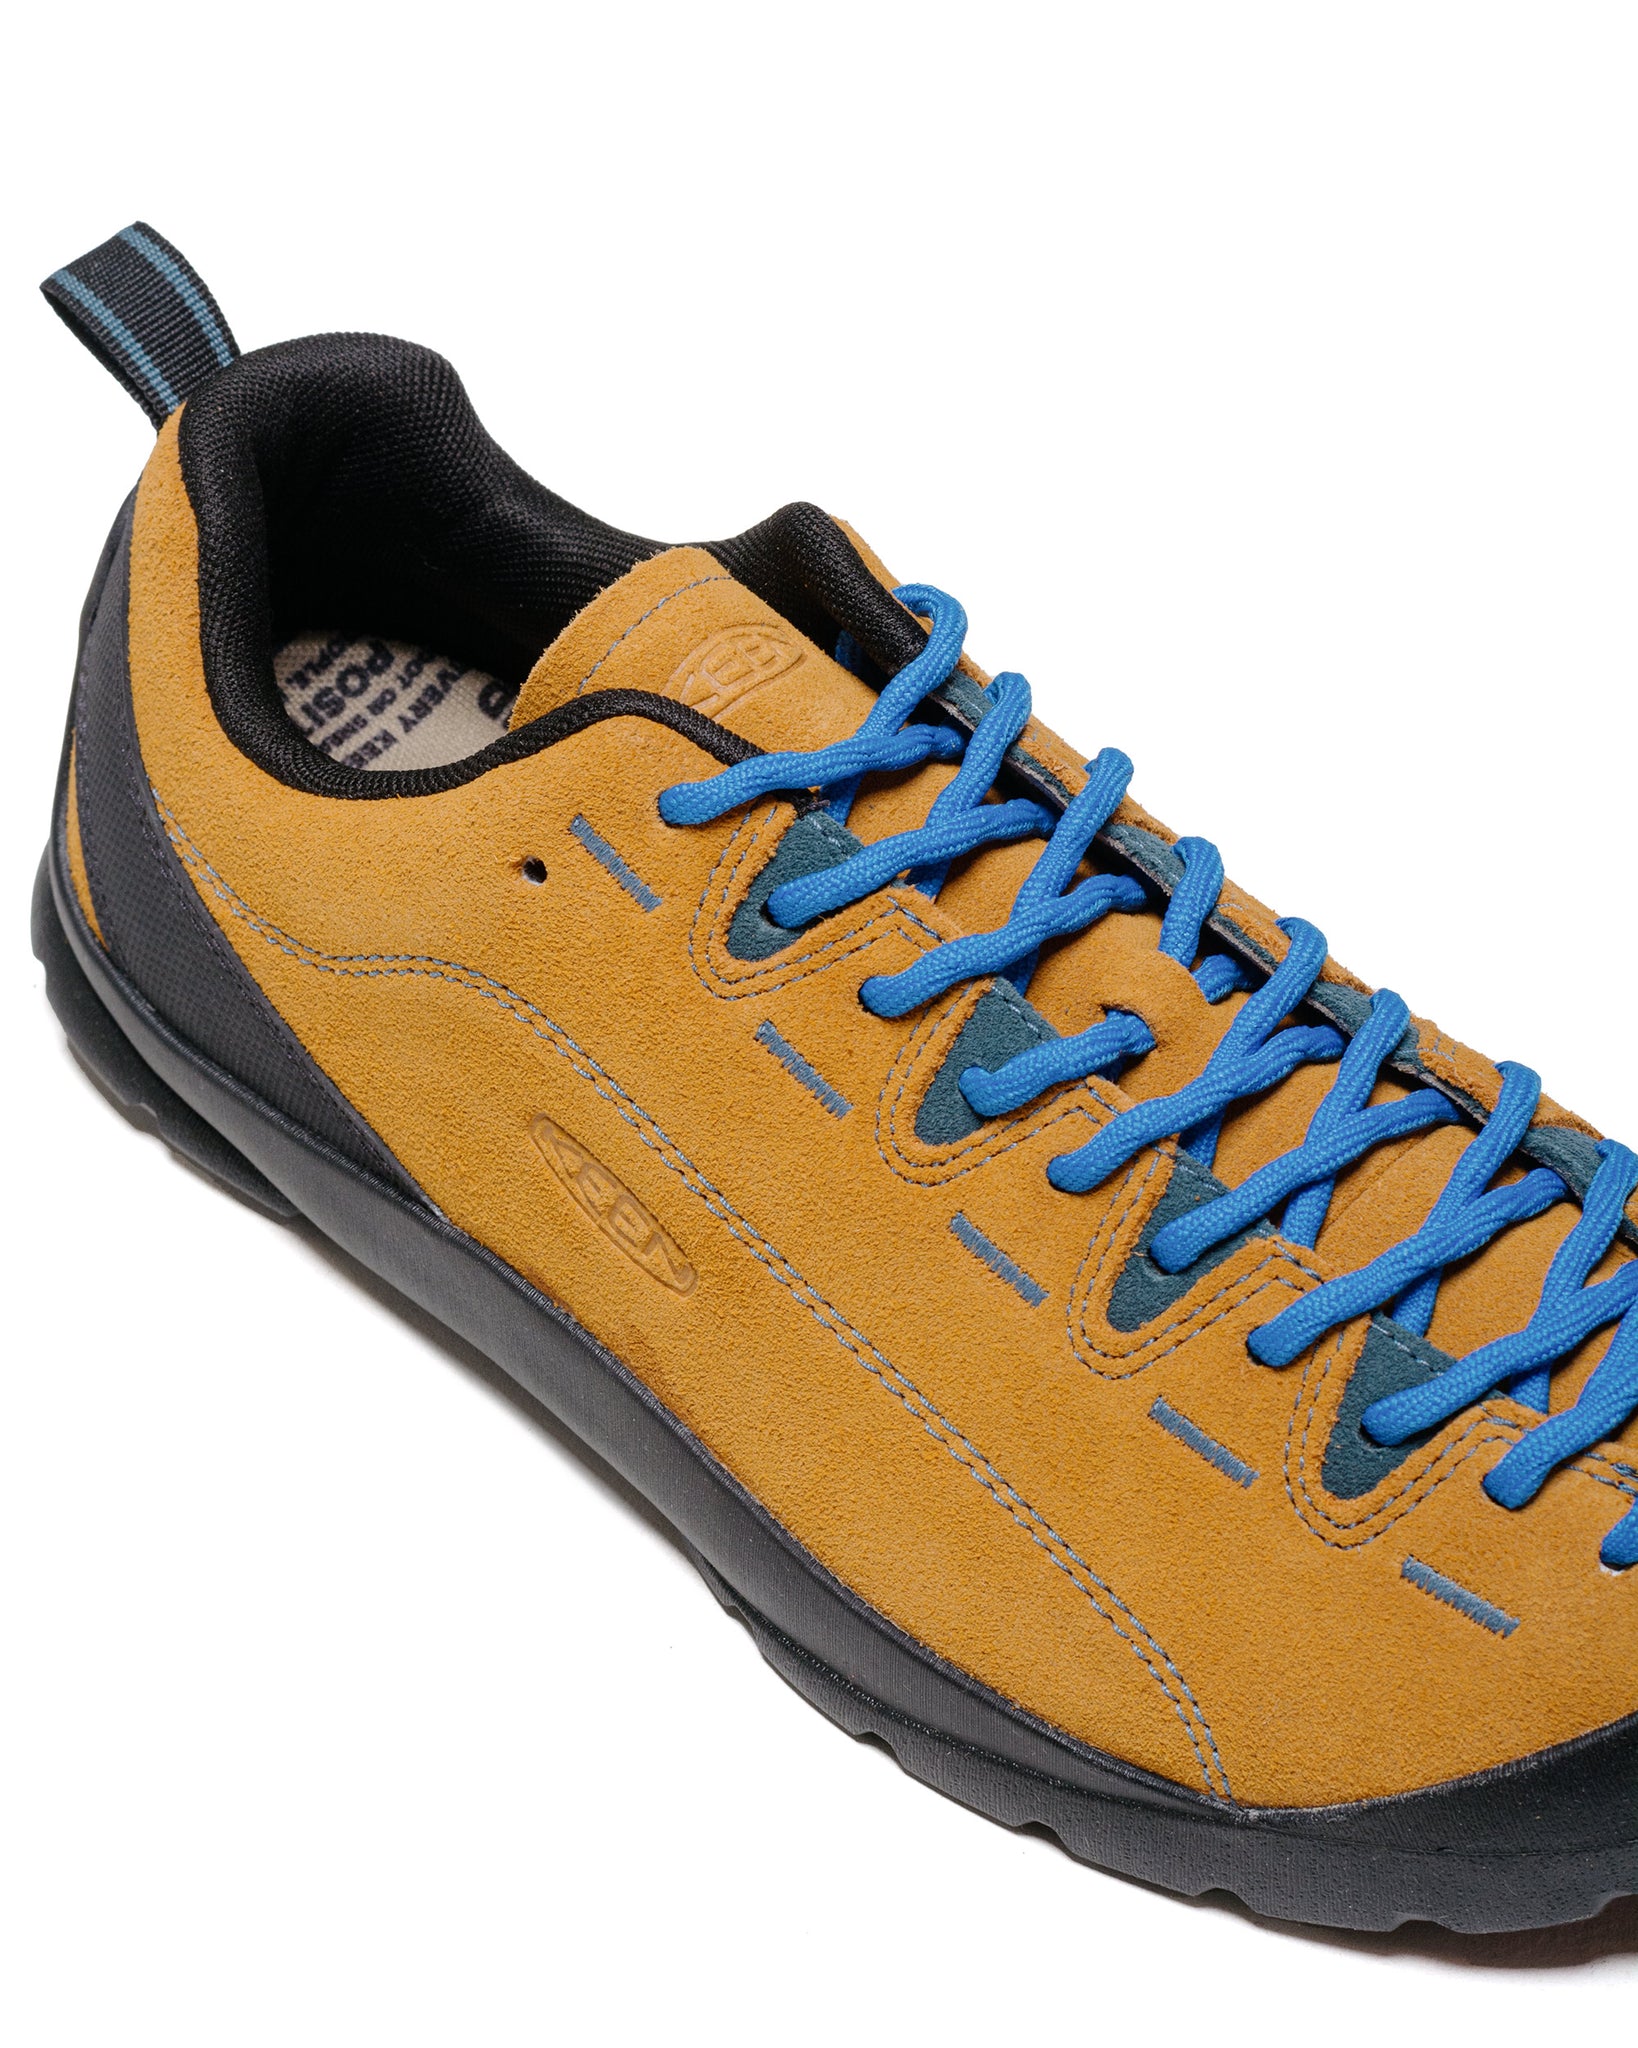 KEEN Jasper Cathay Spice/Orion Blue close